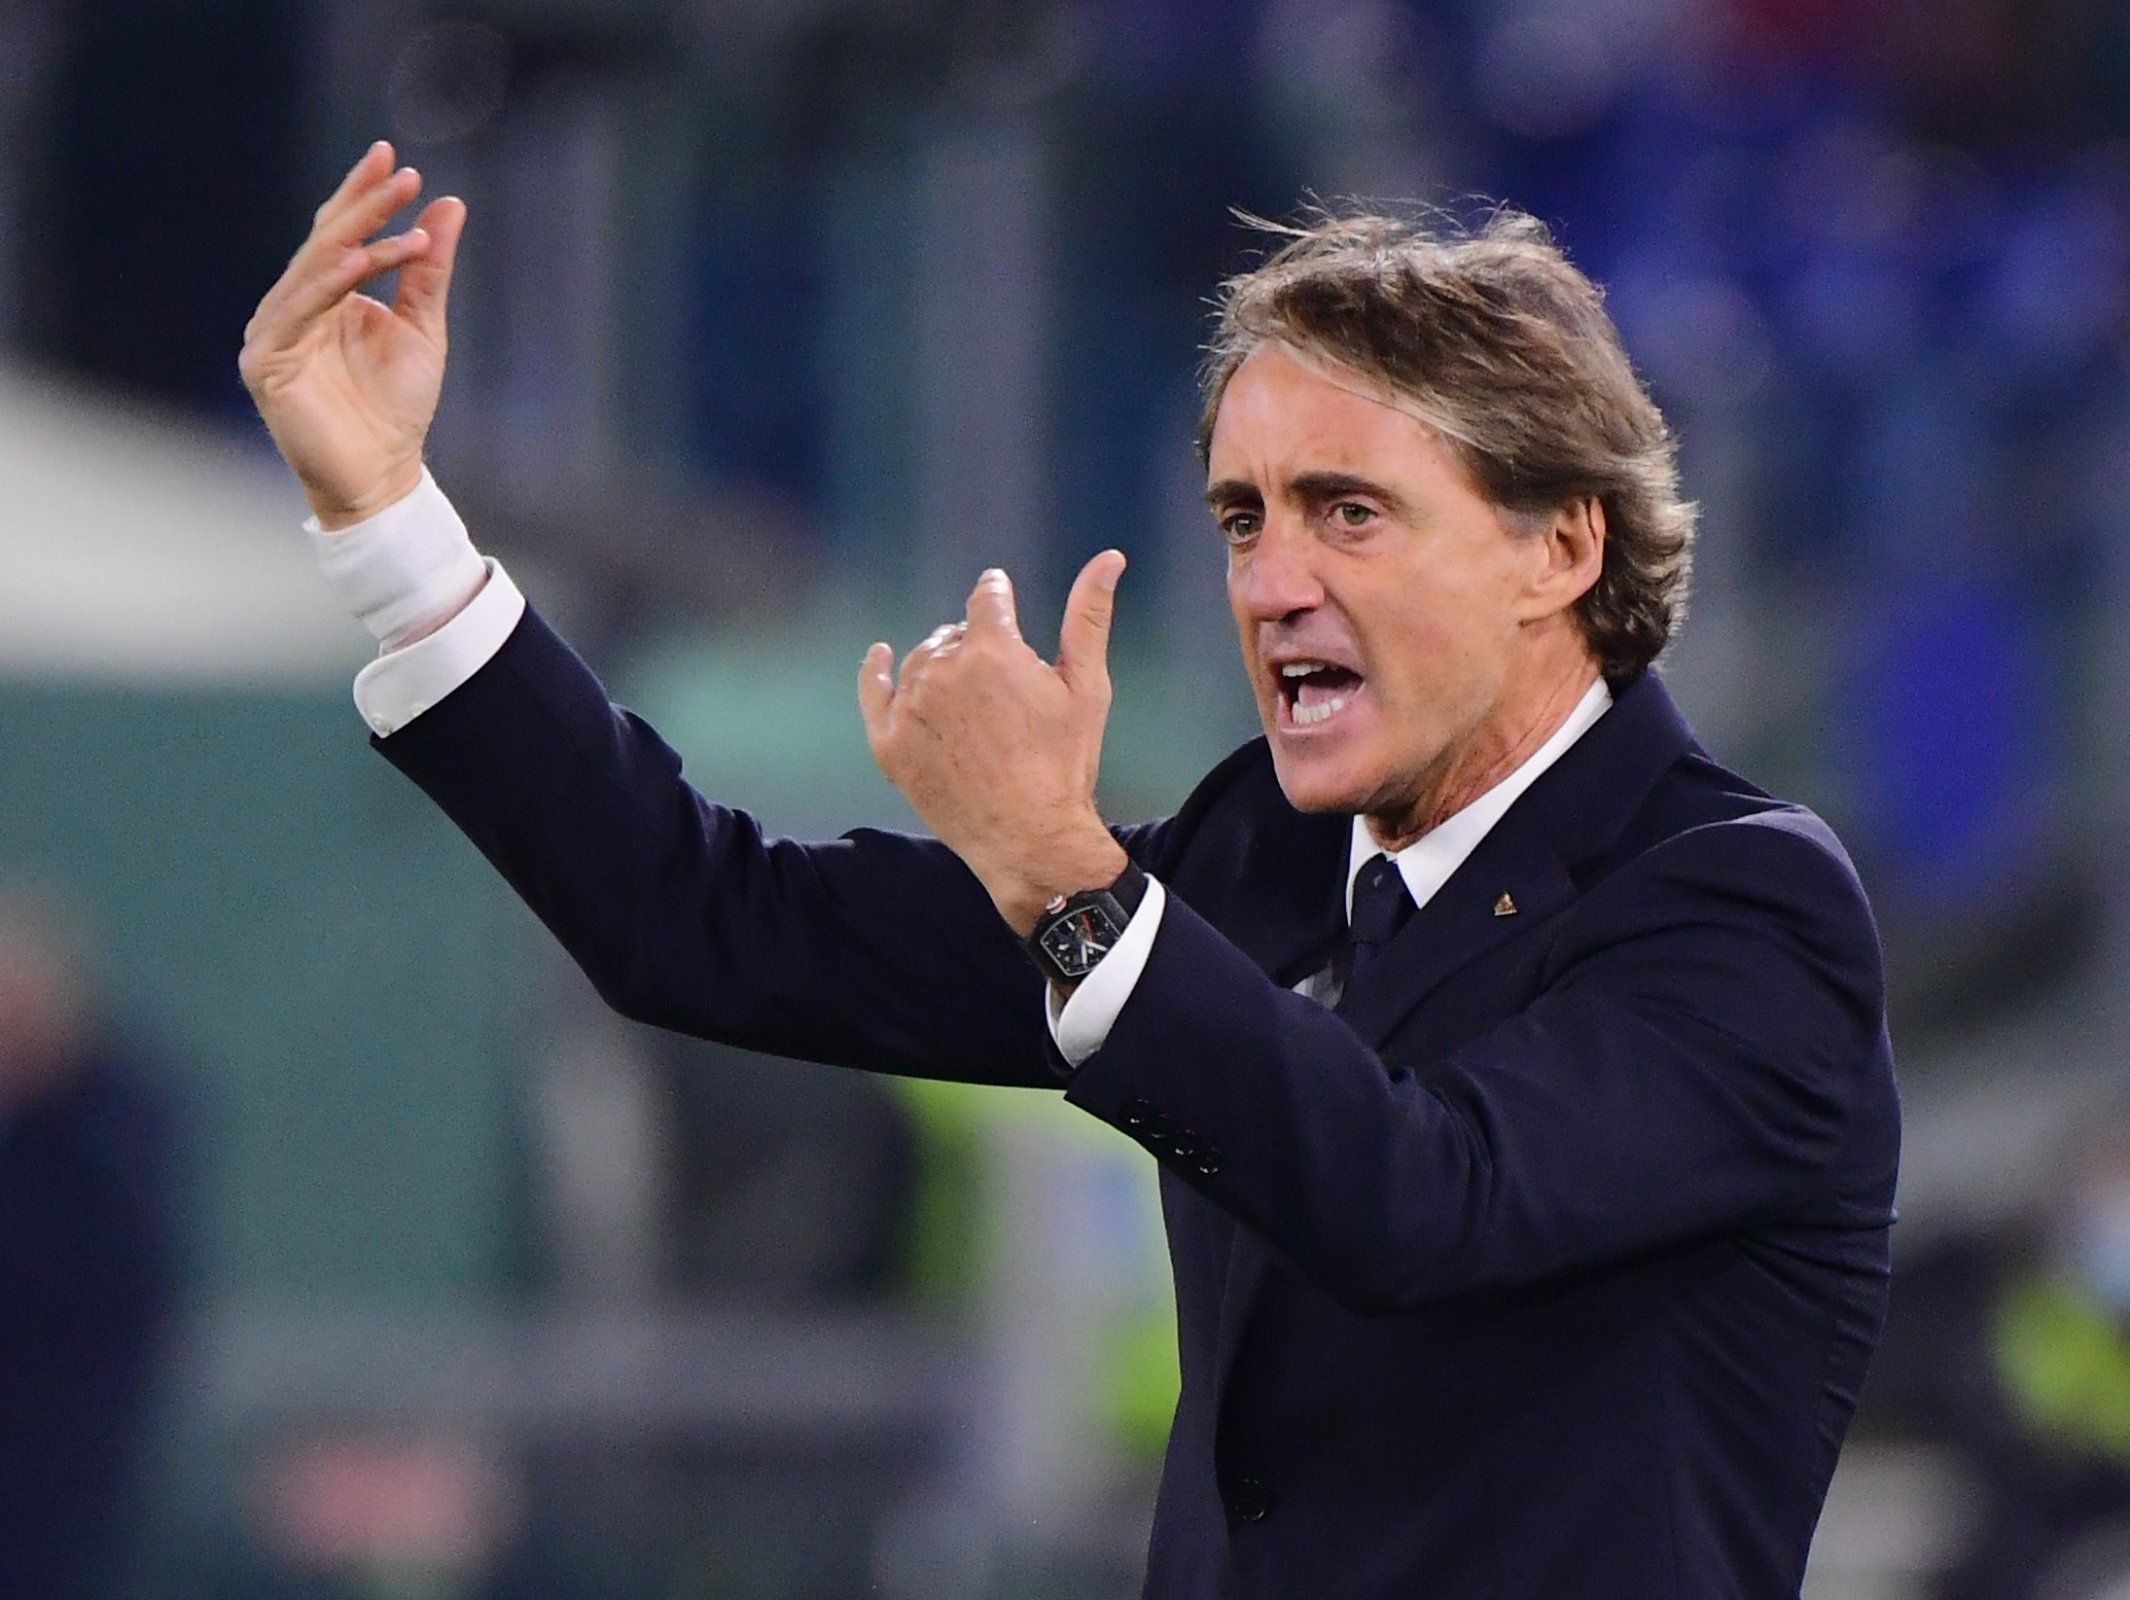 Italy manager Roberto Mancini has been linked to Manchester United